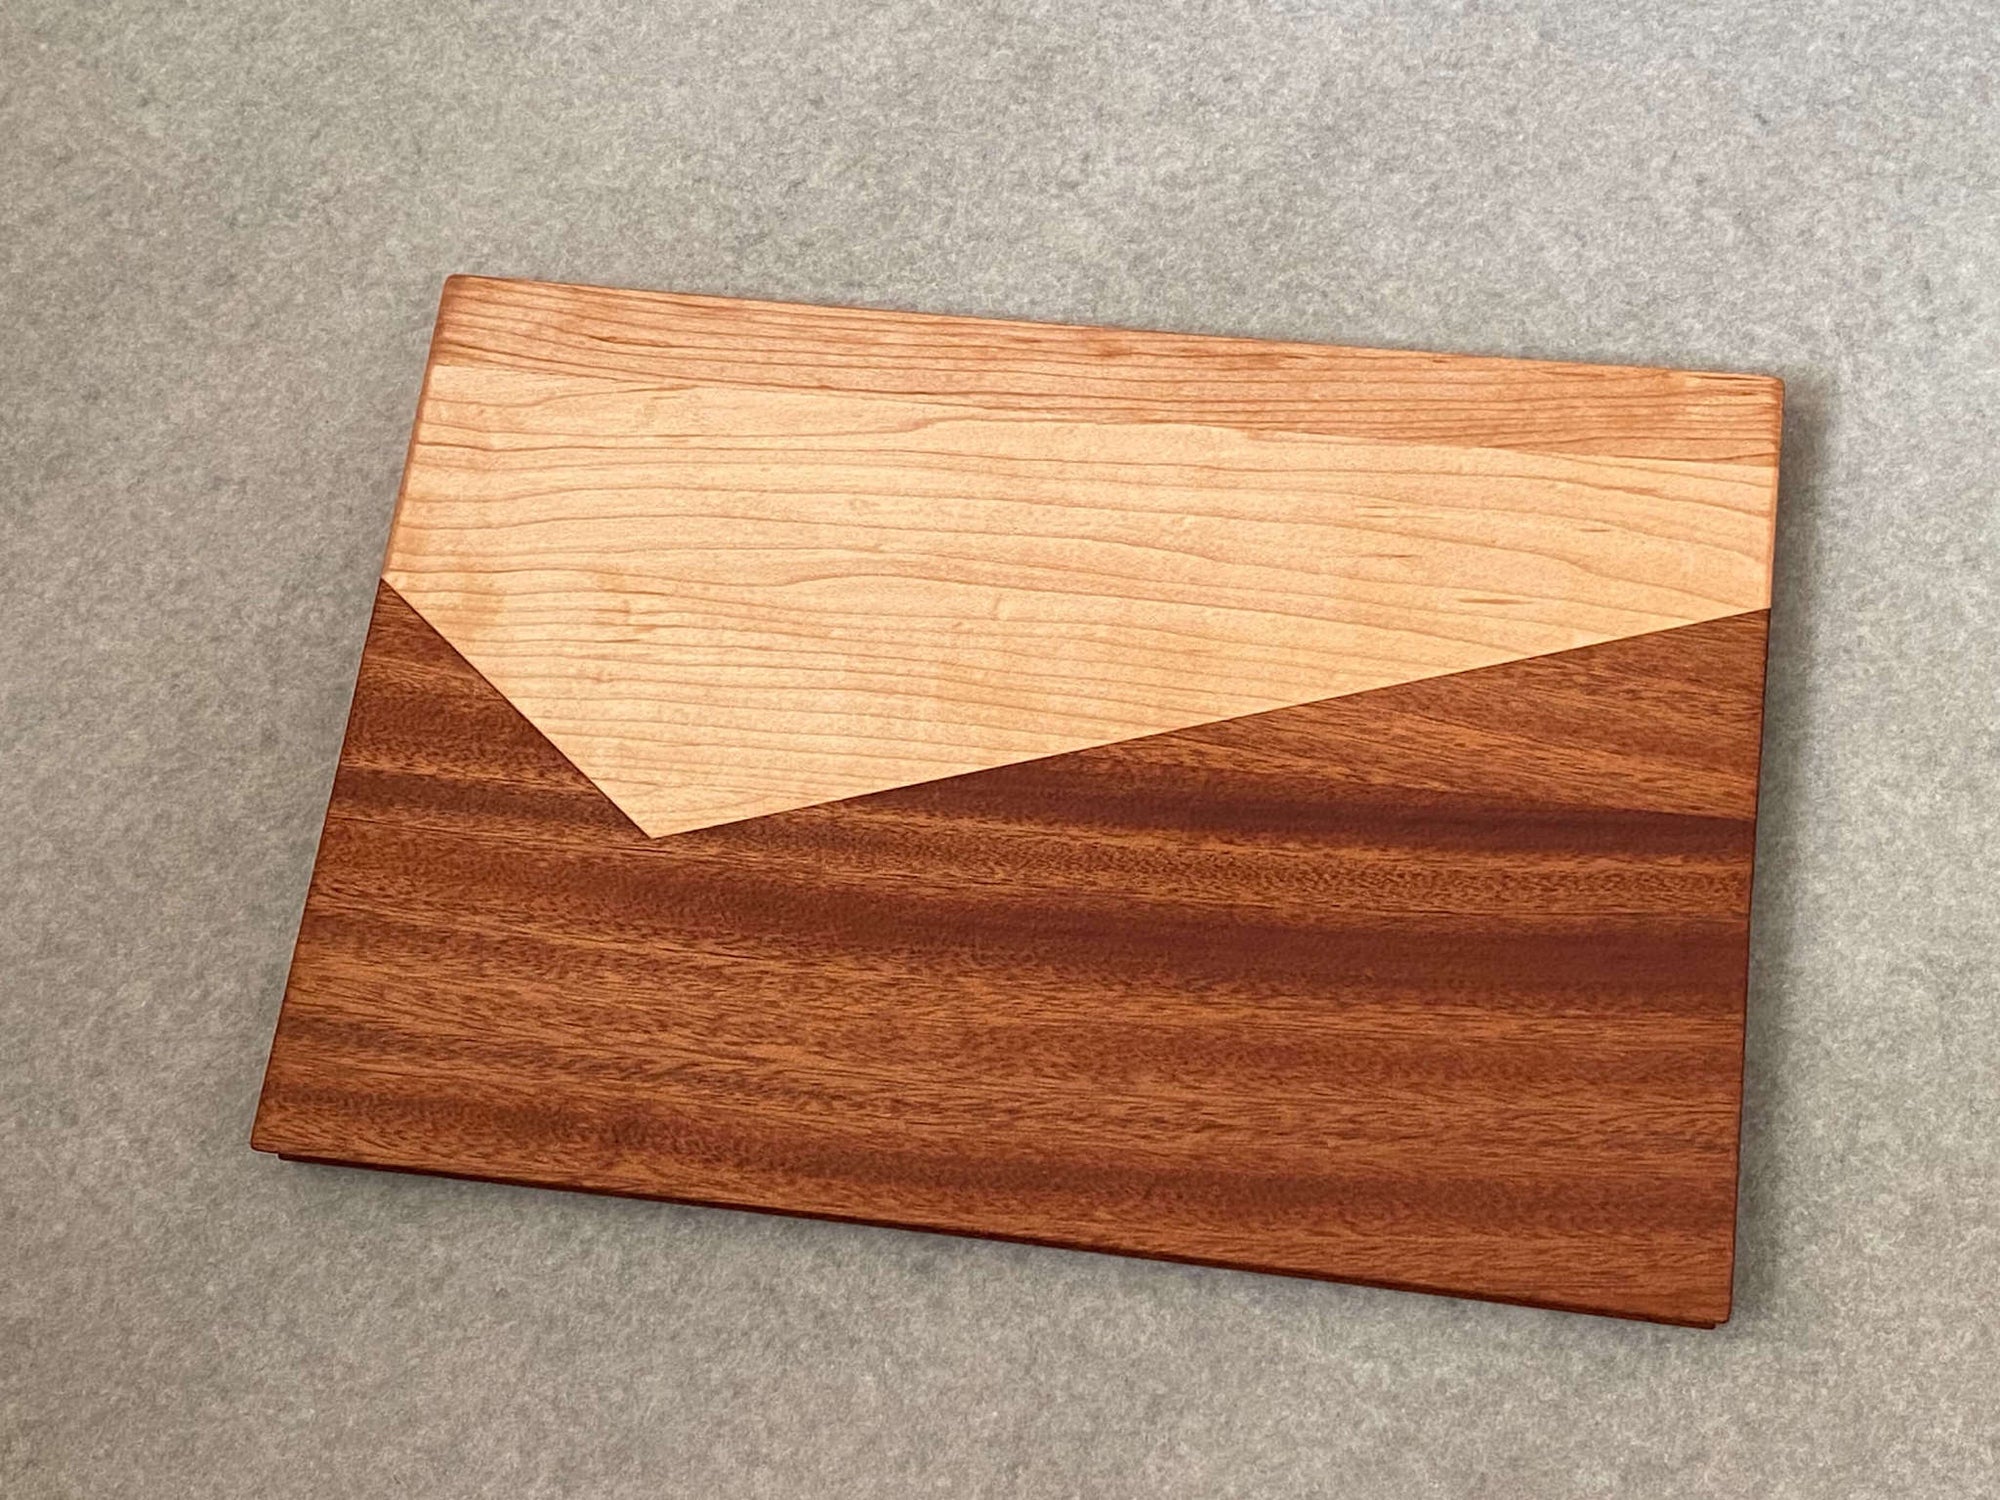 A rectangular board made of two shapes pieced together that resemble a maple mountain against a mahogany background. Sculpted edges provide natural fingerholds.